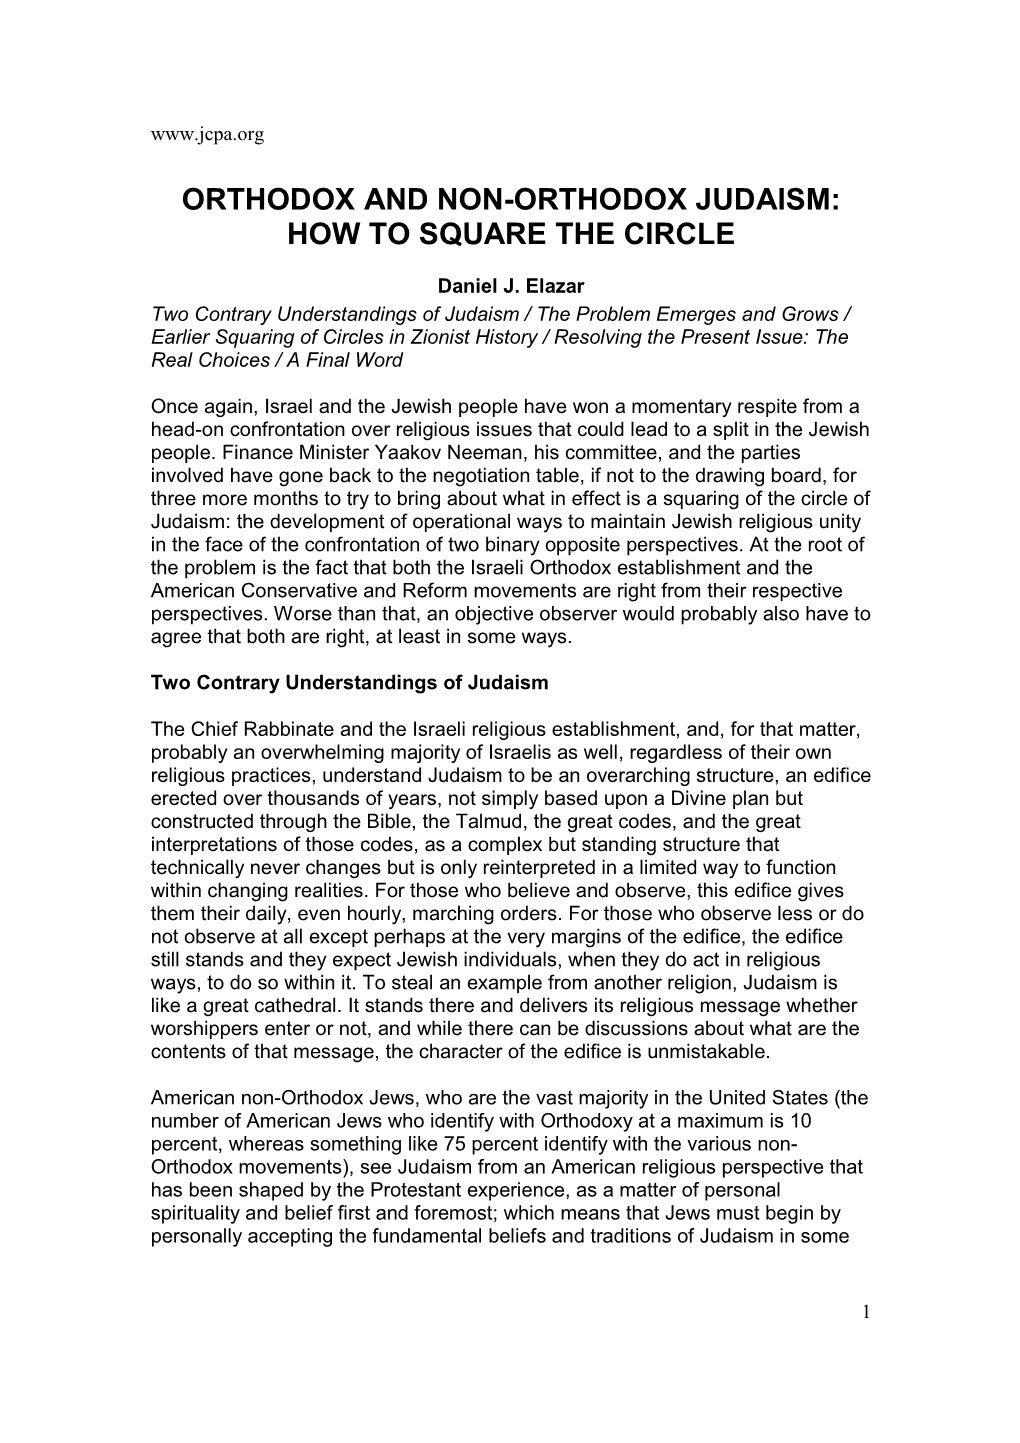 Orthodox and Non-Orthodox Judaism: How to Square the Circle